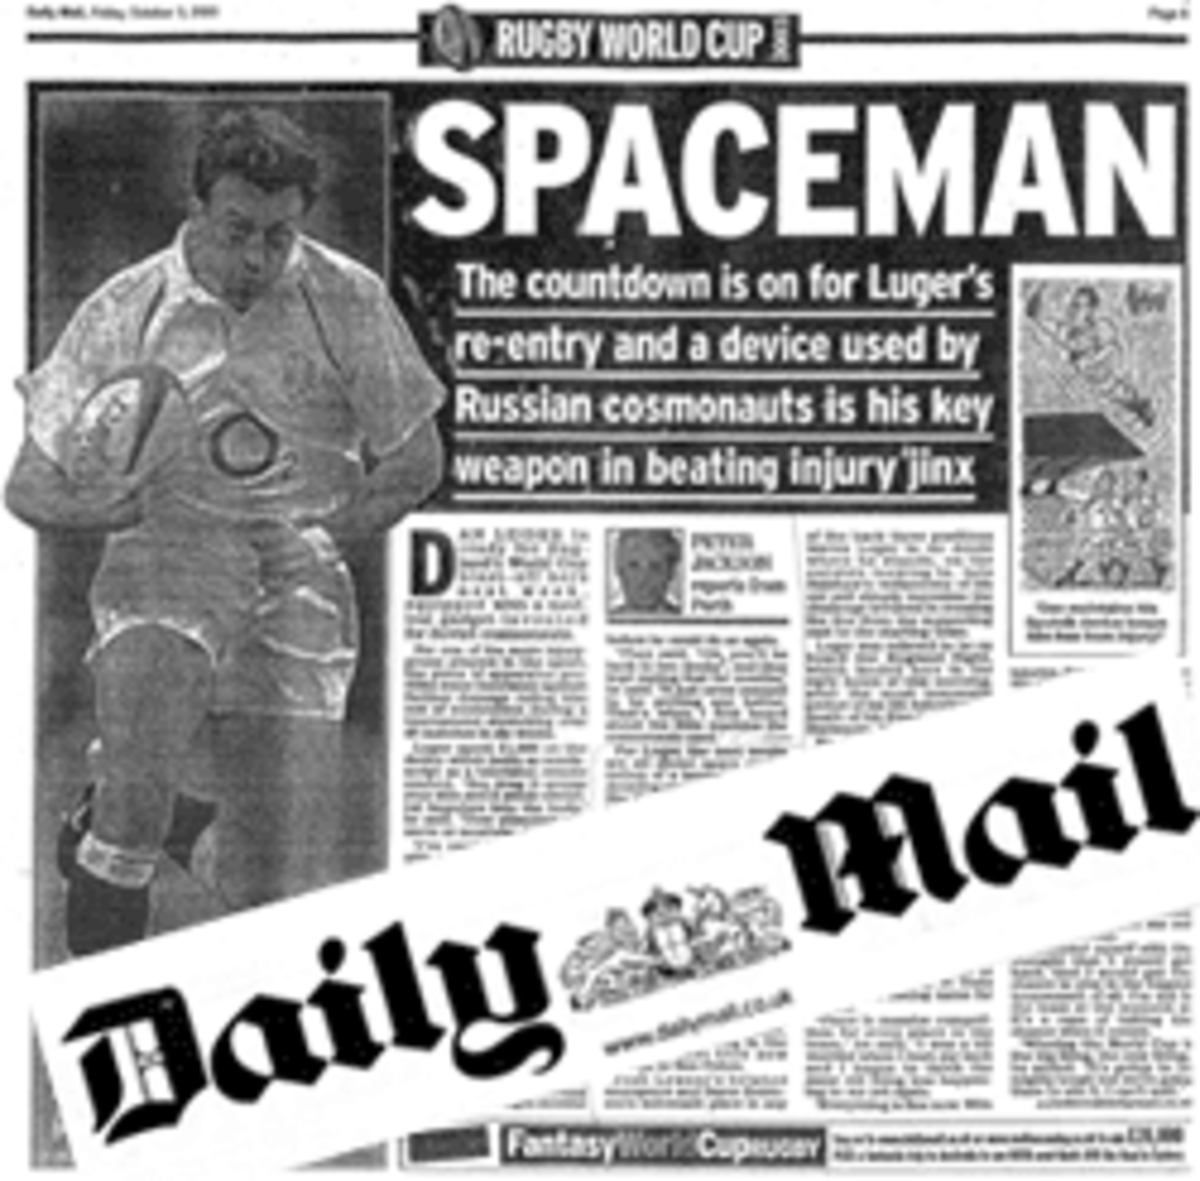 Article in Daily Mail re Scenar used in space